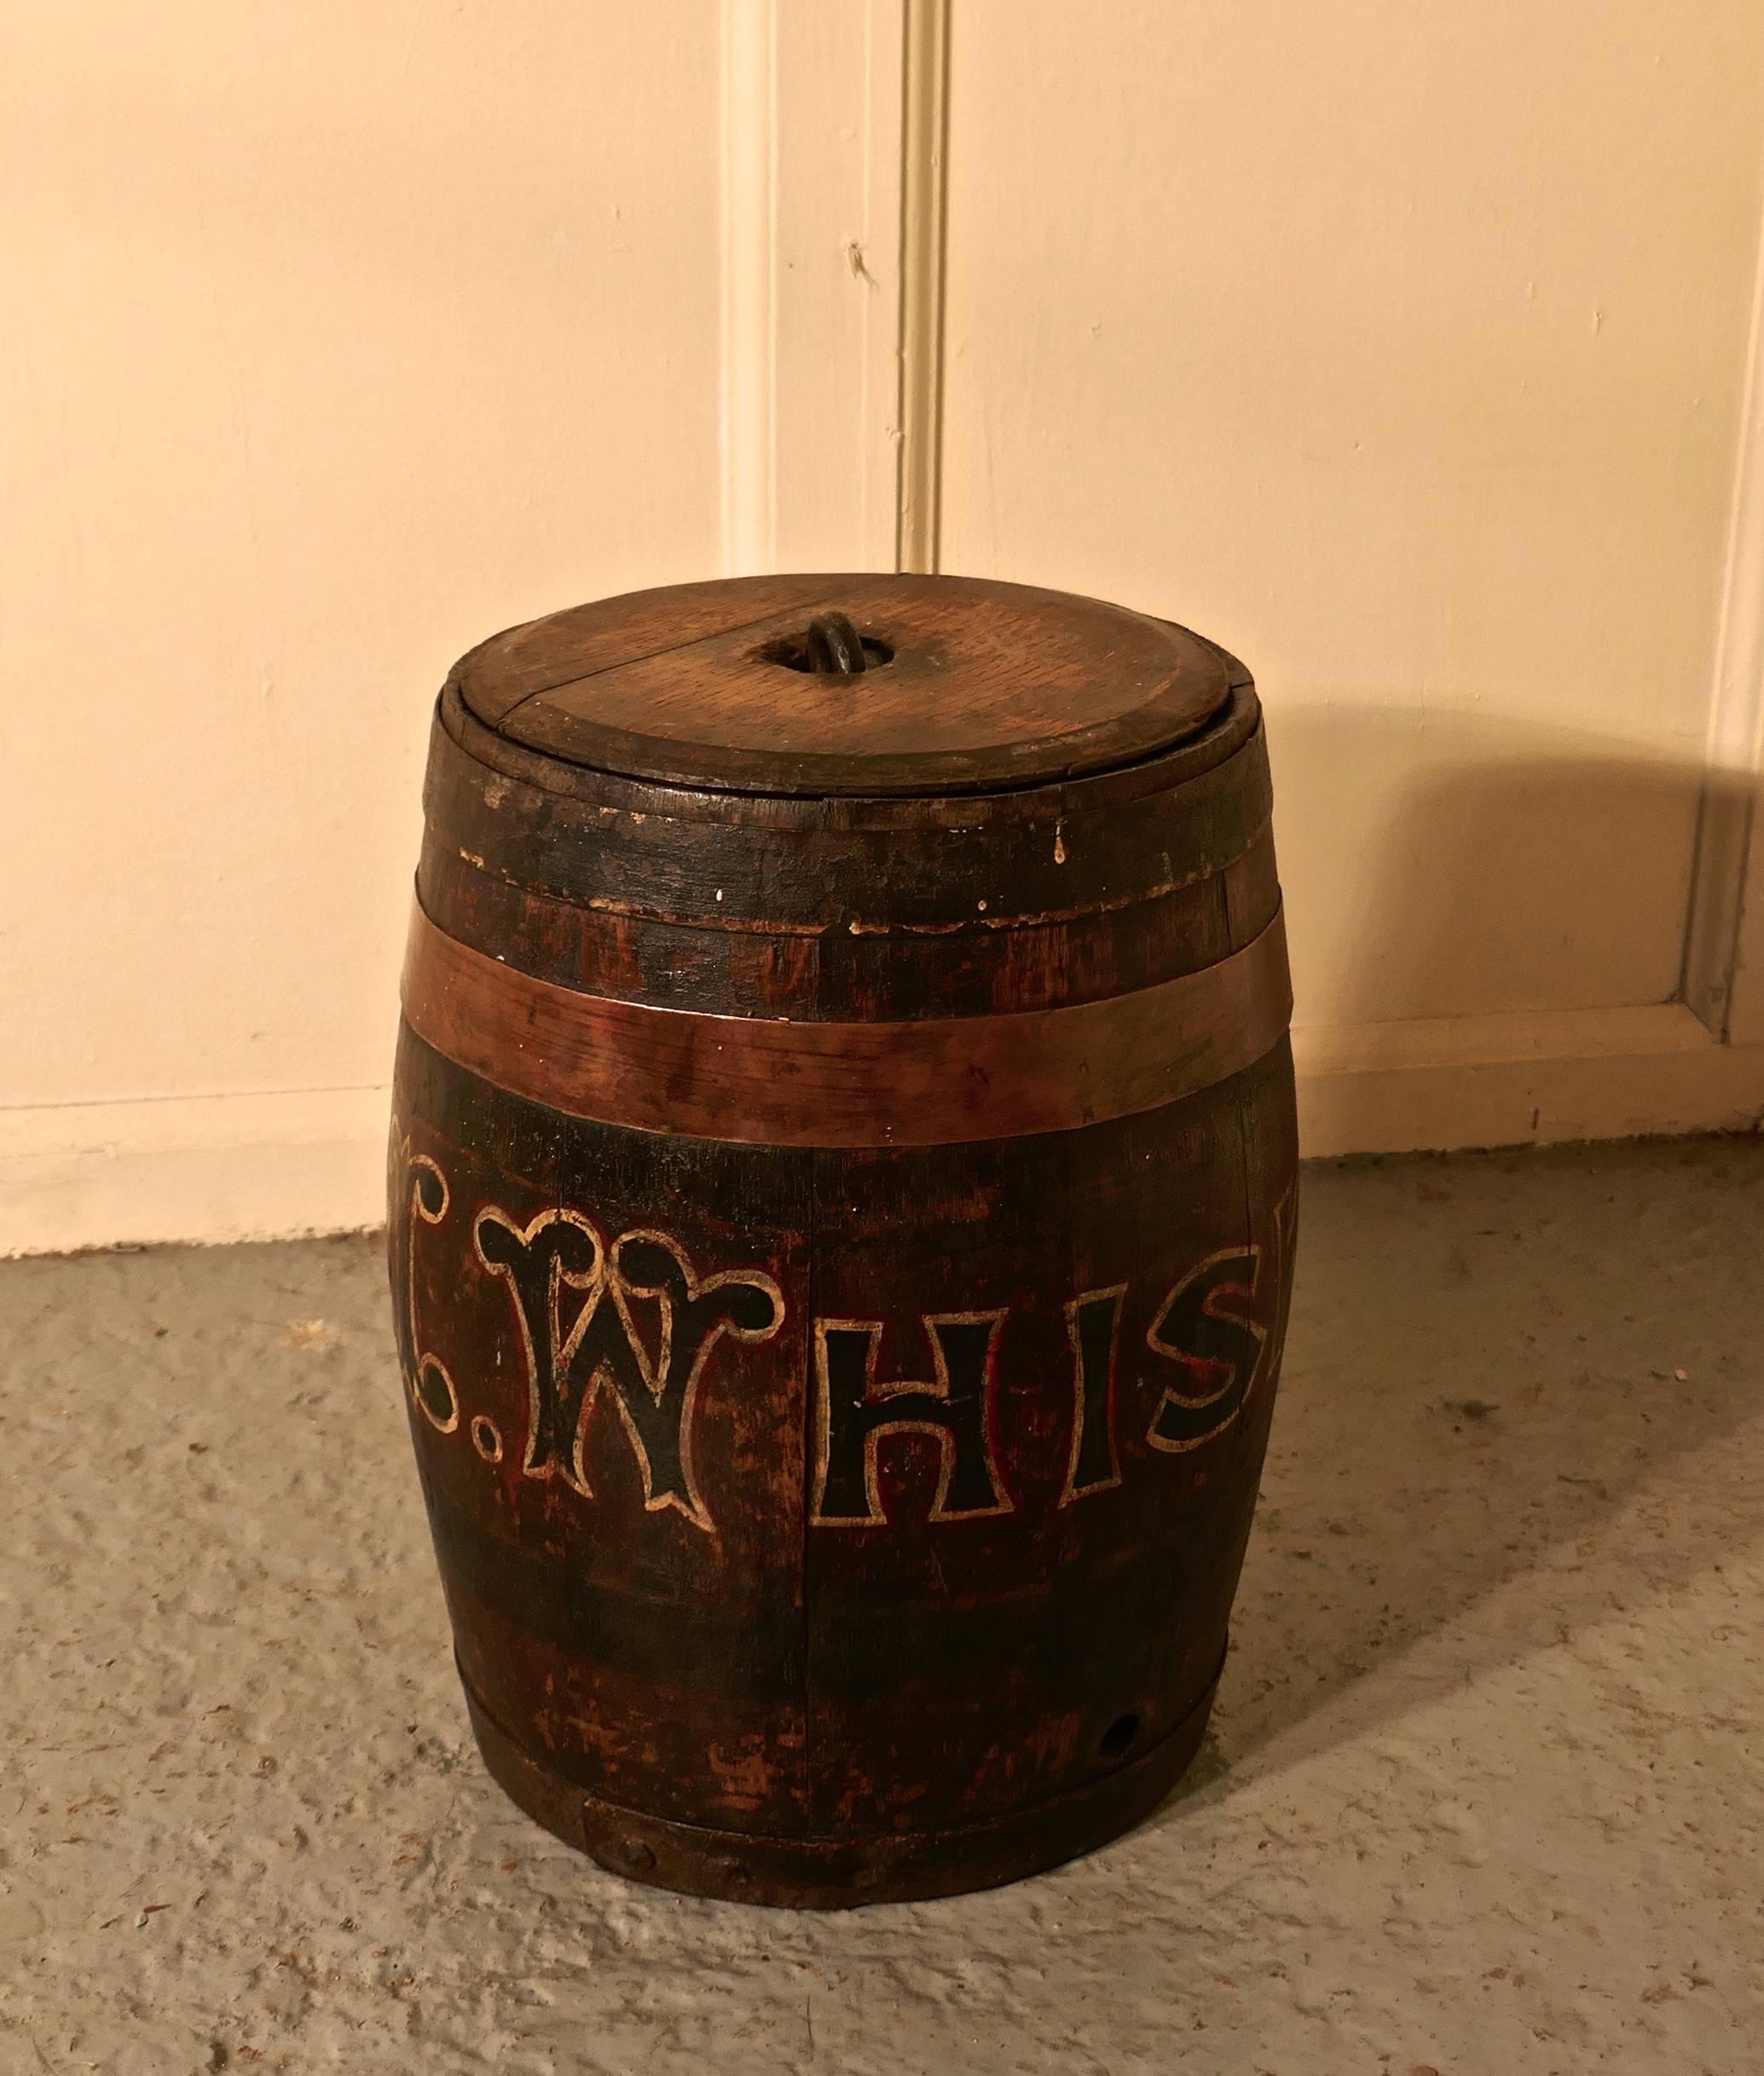 A 19th century oak and copper Irish whiskey barrel, quirky umbrella stand

This good looking piece started life as a Brandy Barrel, it is has since been painted over and labeled as a, “I WHISKEY” it is now has a new lease of life perhaps as as a